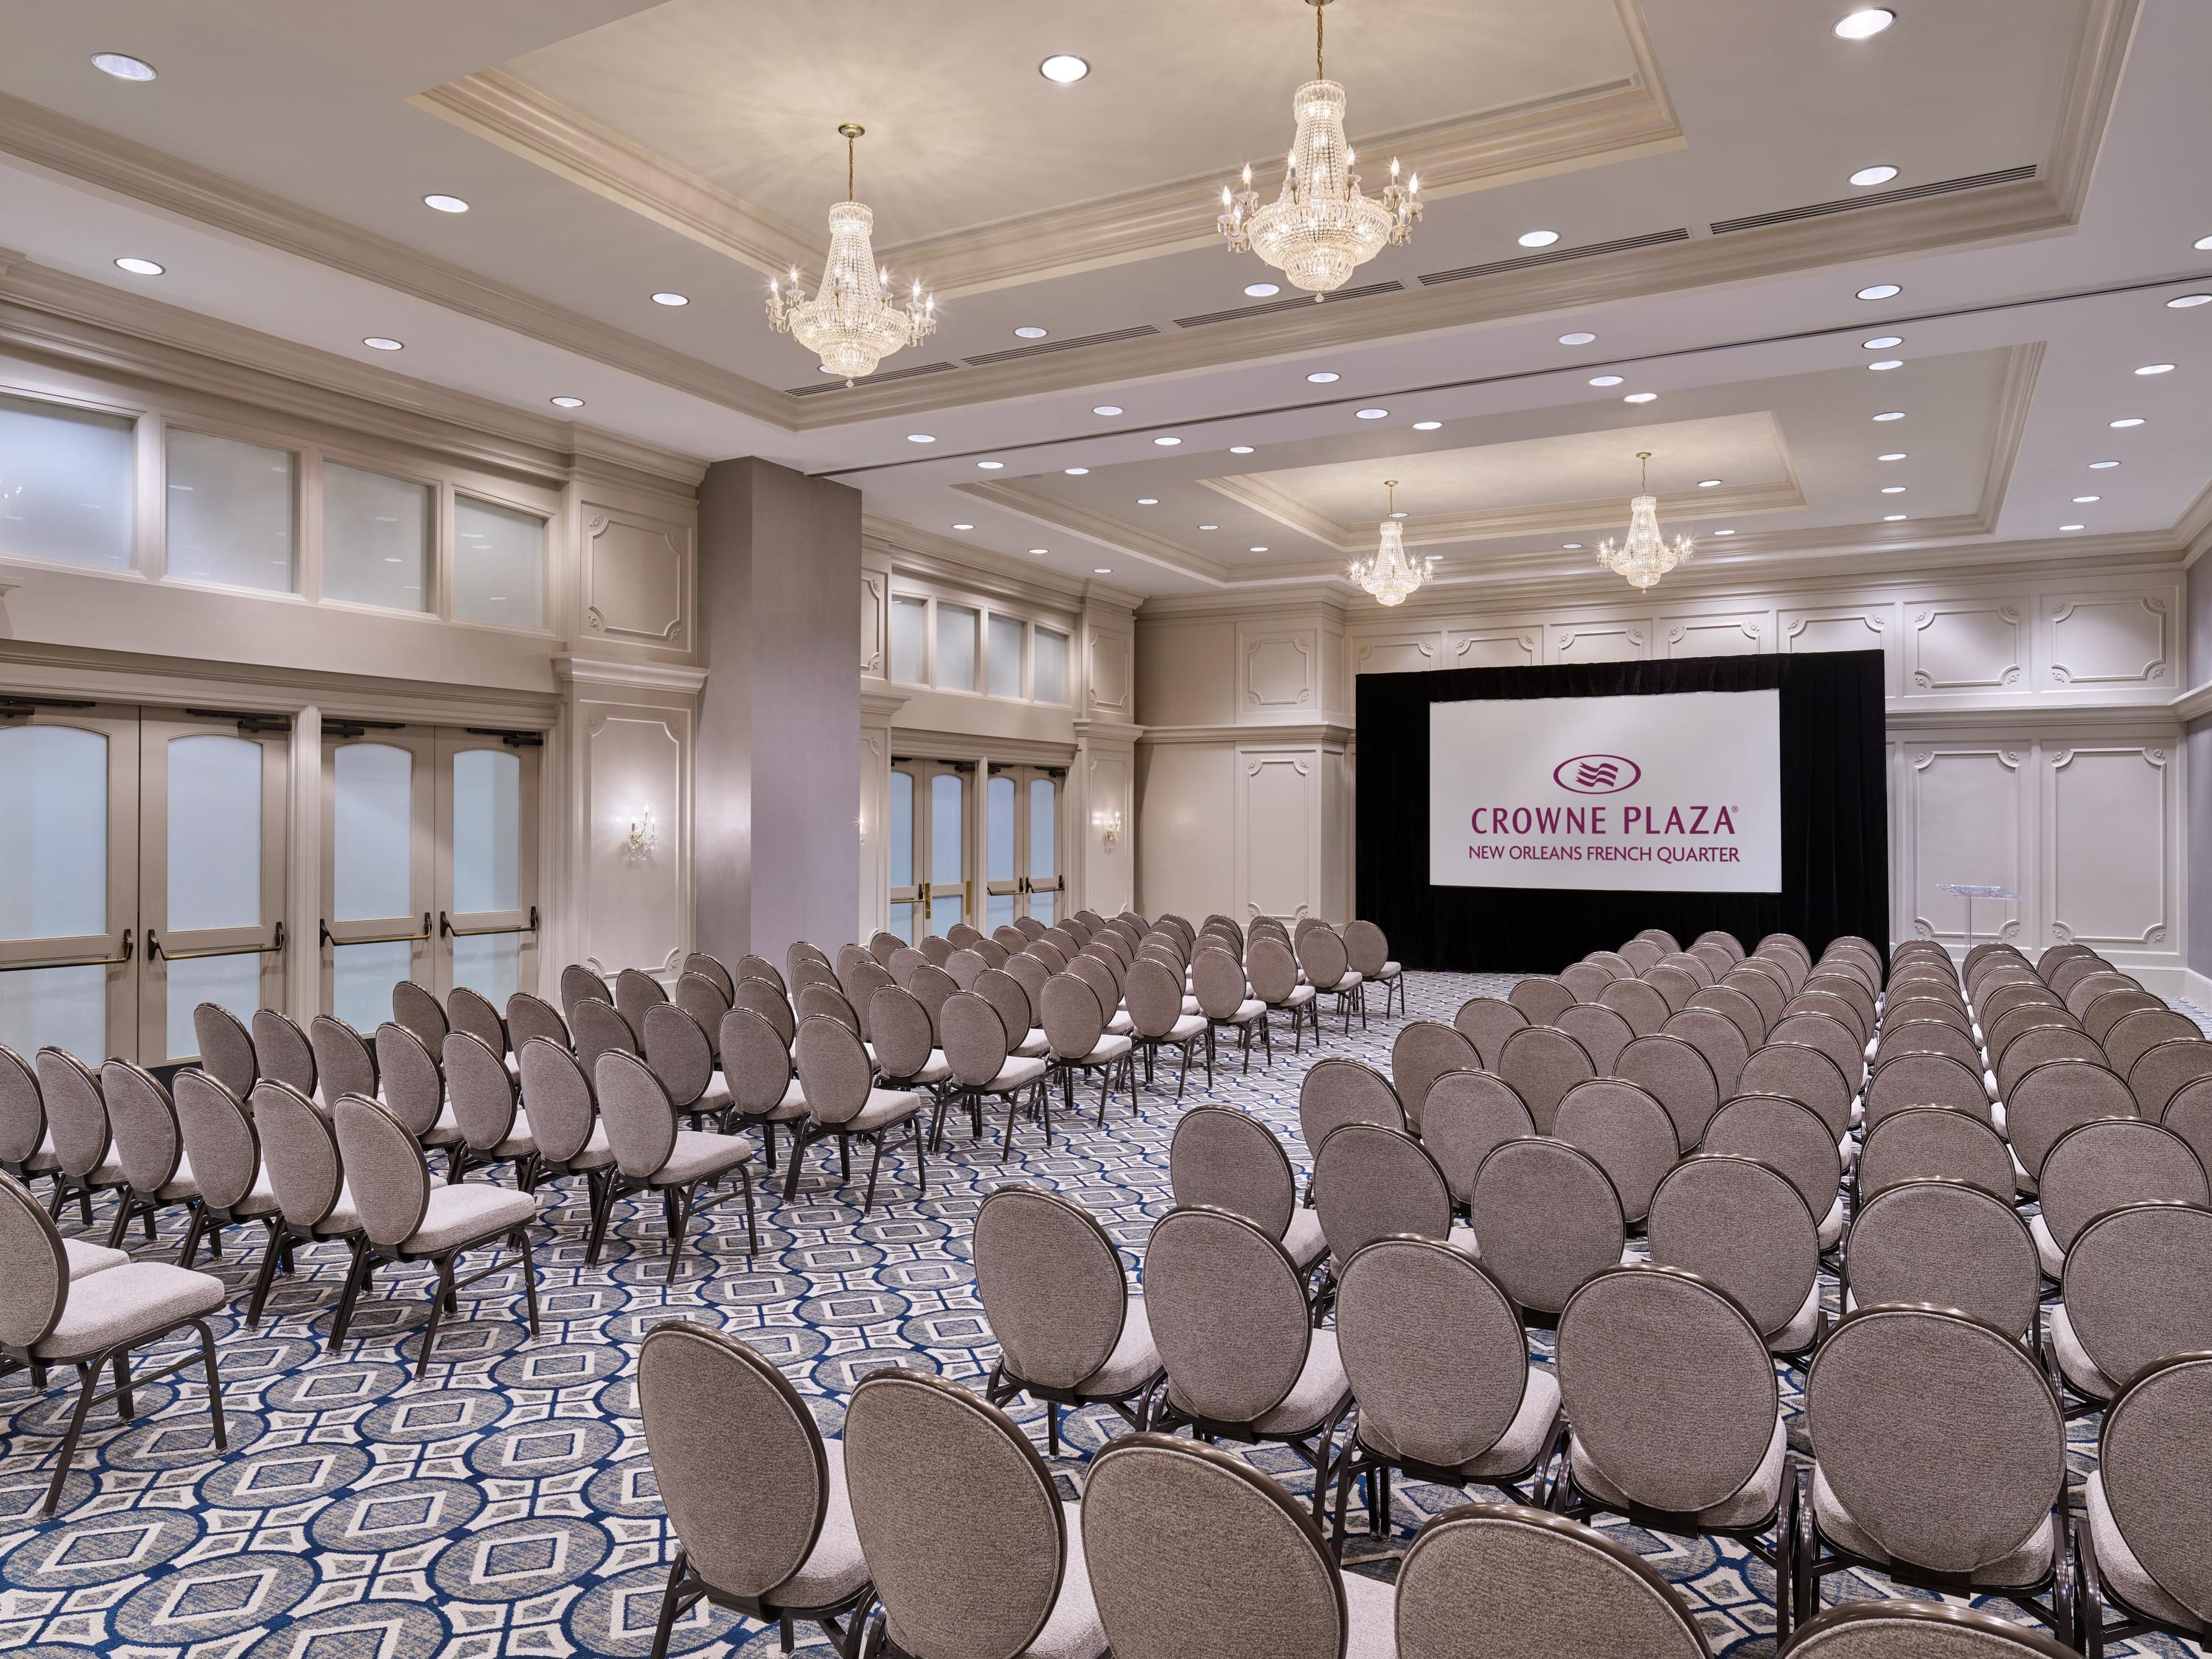 Host your New Orleans business meeting, convention, social gathering, or celebration in our exquisite French Quarter hotel, with 32,000 sq ft of versatile meeting space, including ballrooms for up to 800 guests and beautiful balcony space. Equipped with audiovisual technology, catering, and planning specialists, we ensure your event is a success.